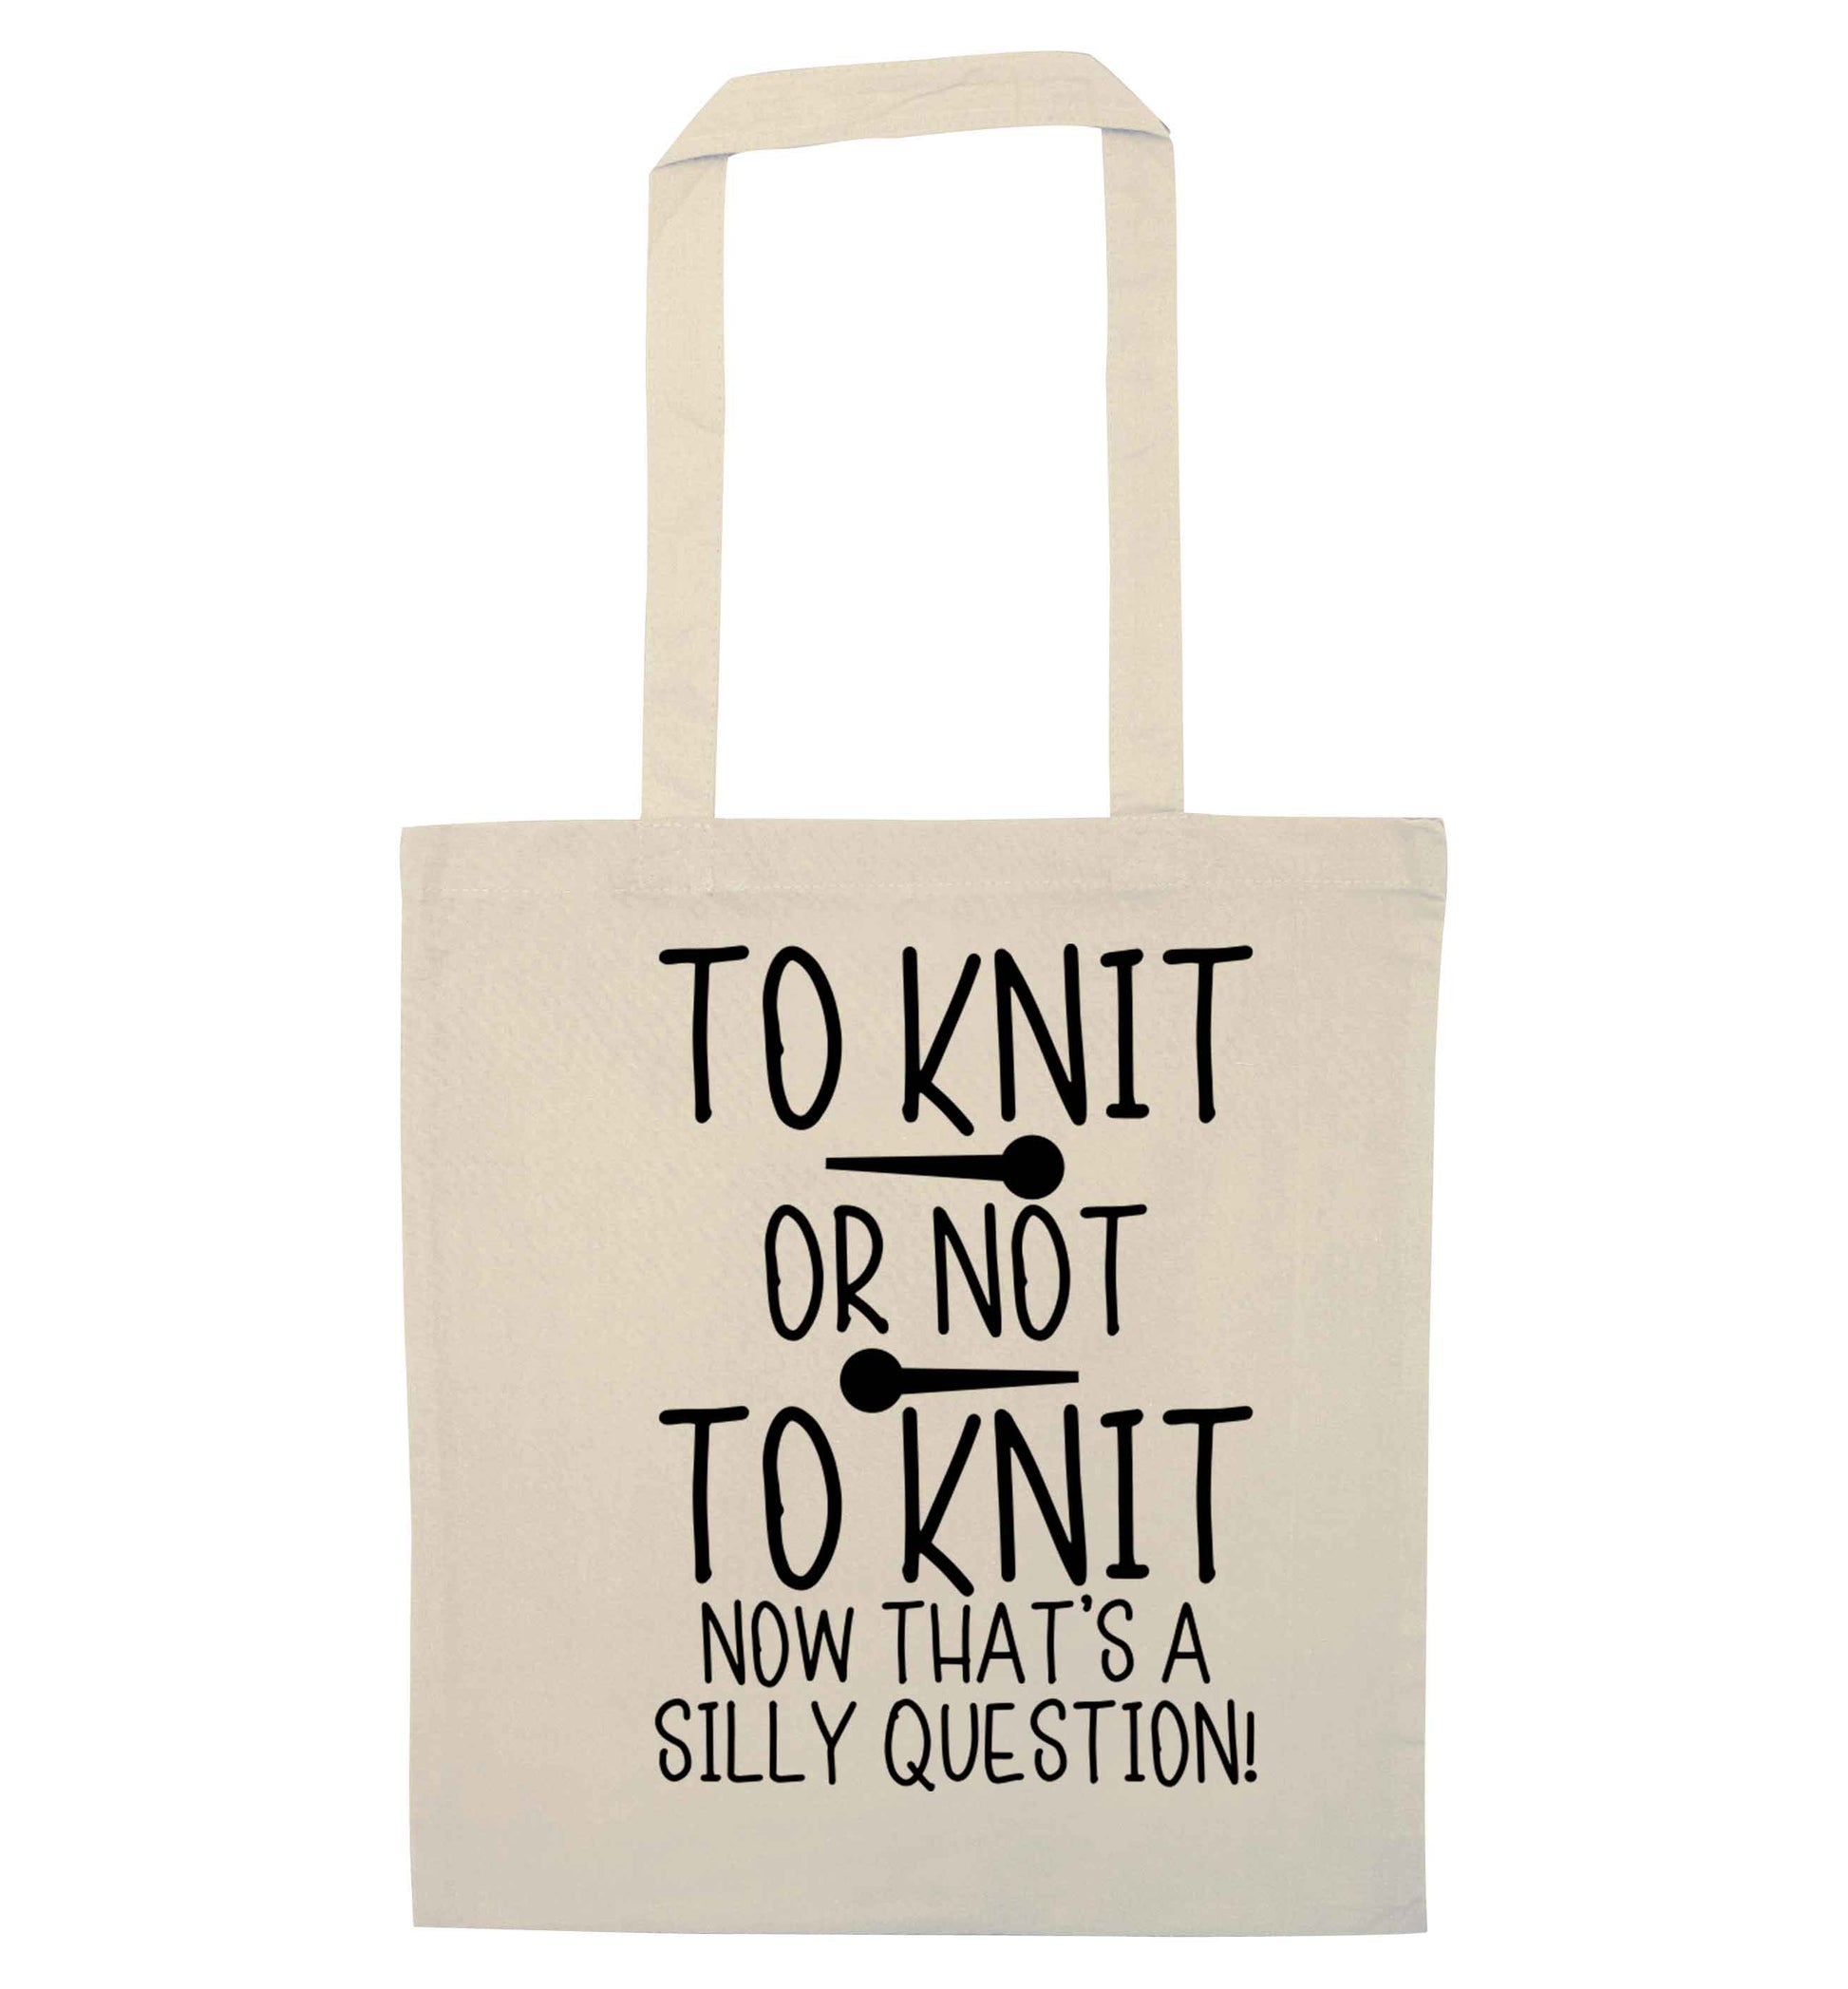 To knit or not to knit now that's a silly question natural tote bag